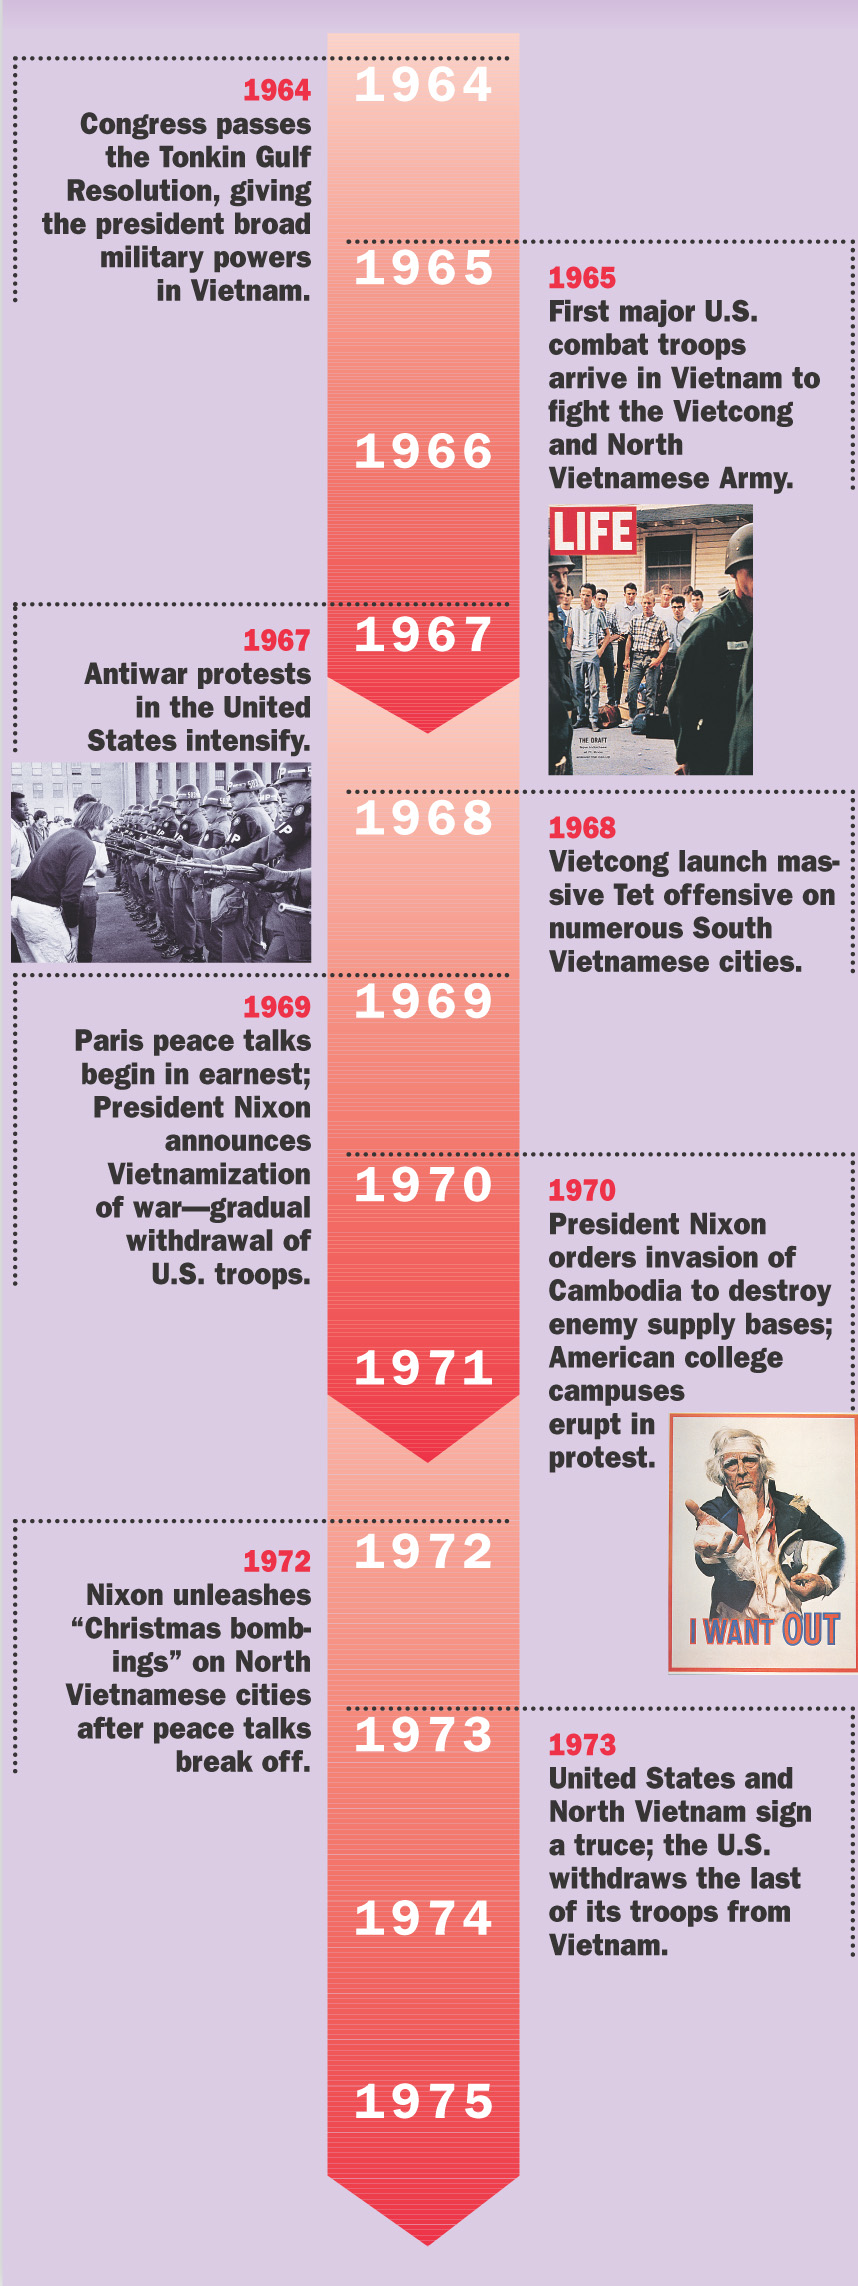 A timeline shows events from 1964 to 1975.